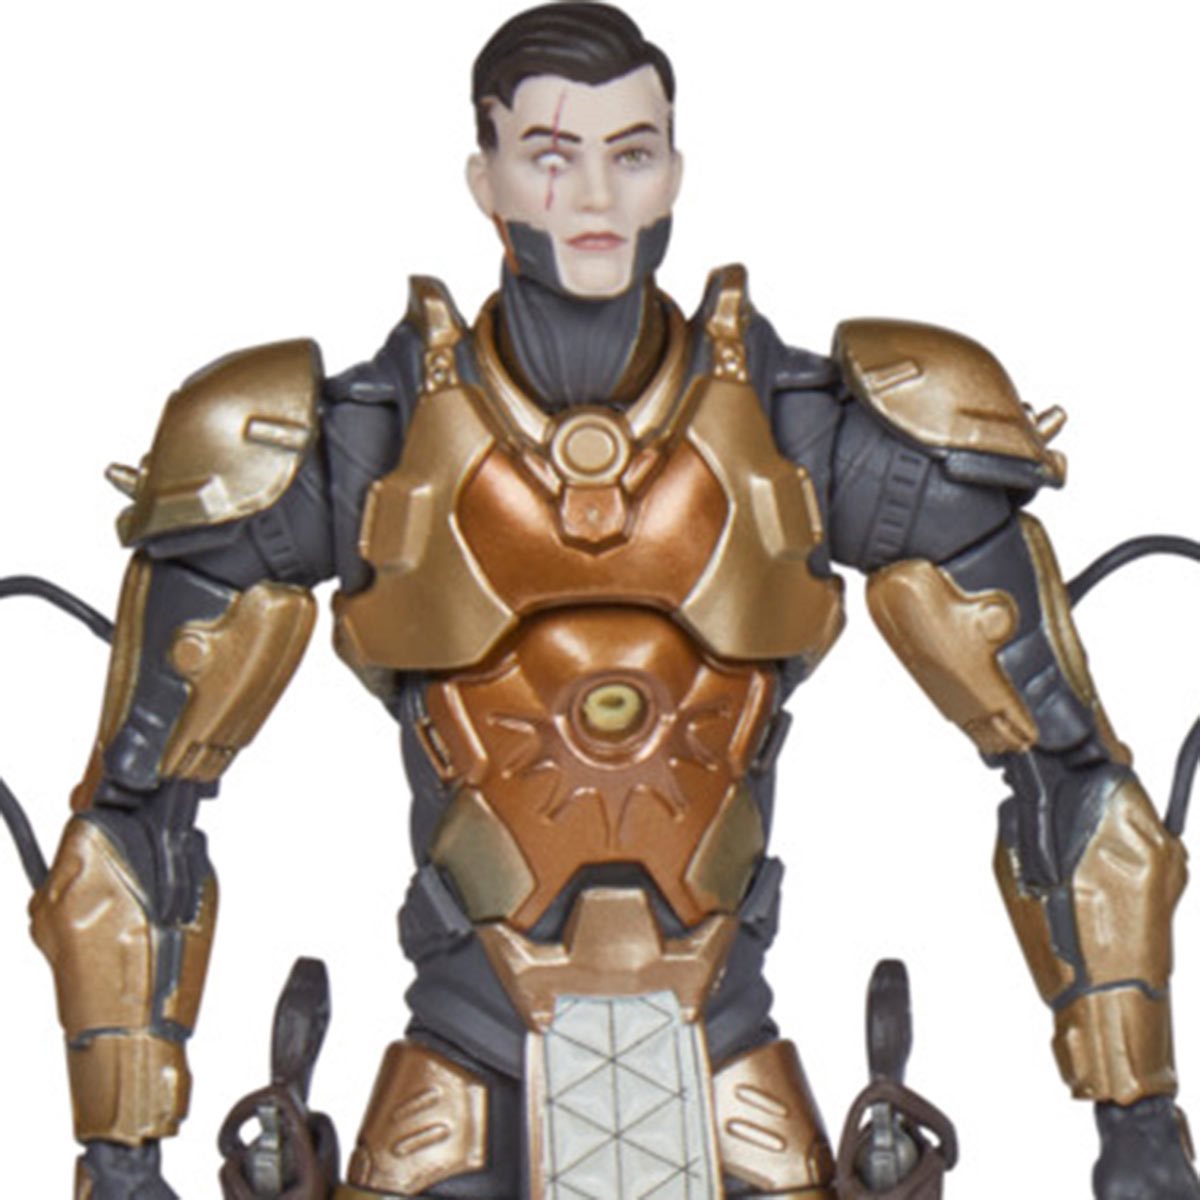 Victory Royale Midas 6-Inch Action Figure